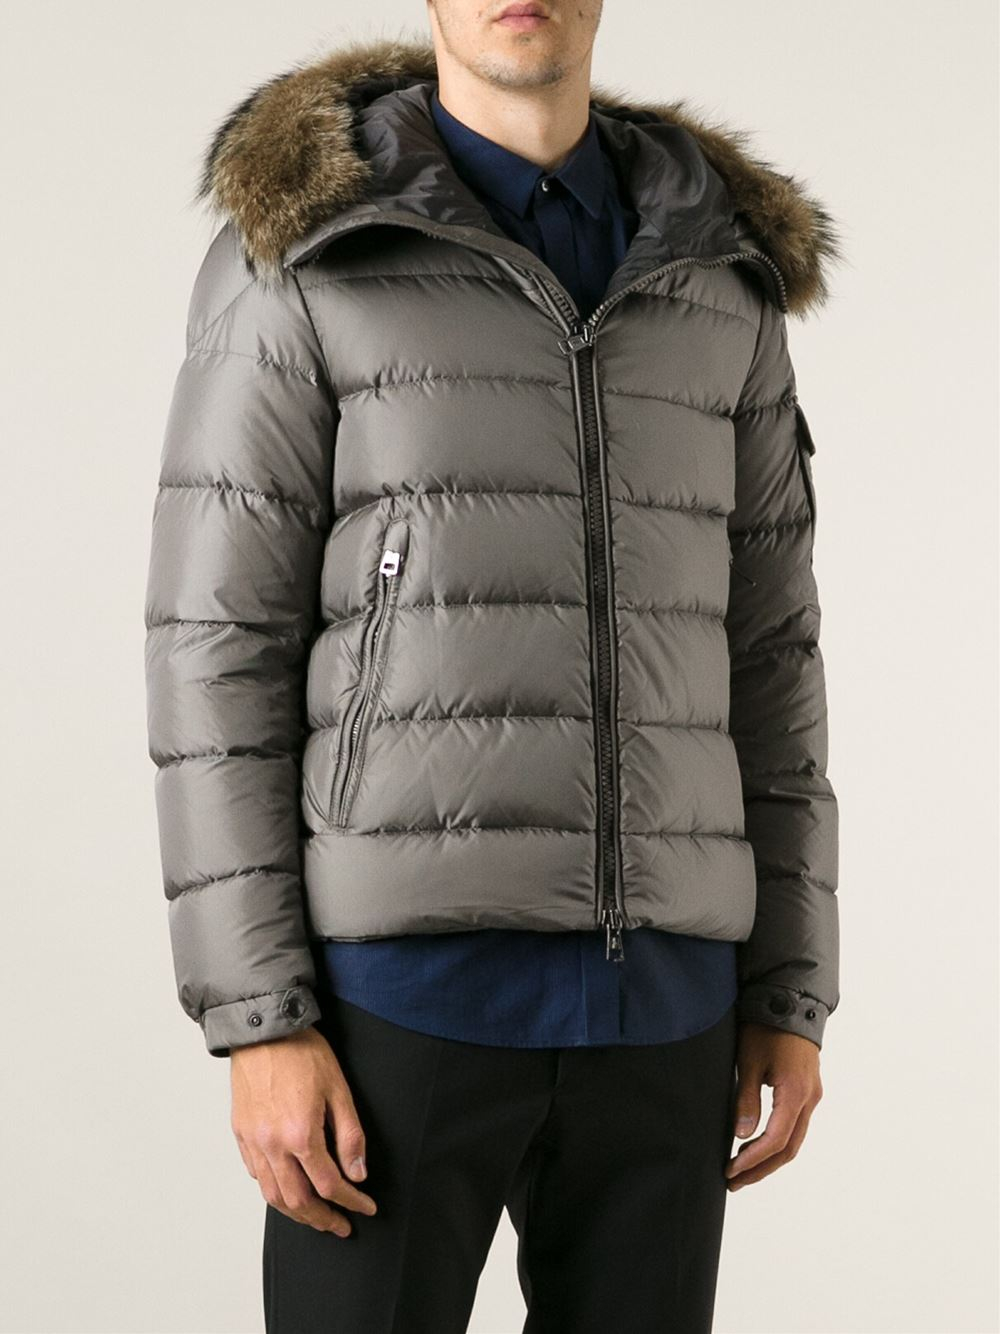 Moncler Byron Padded Jacket in Grey (Gray) for Men - Lyst